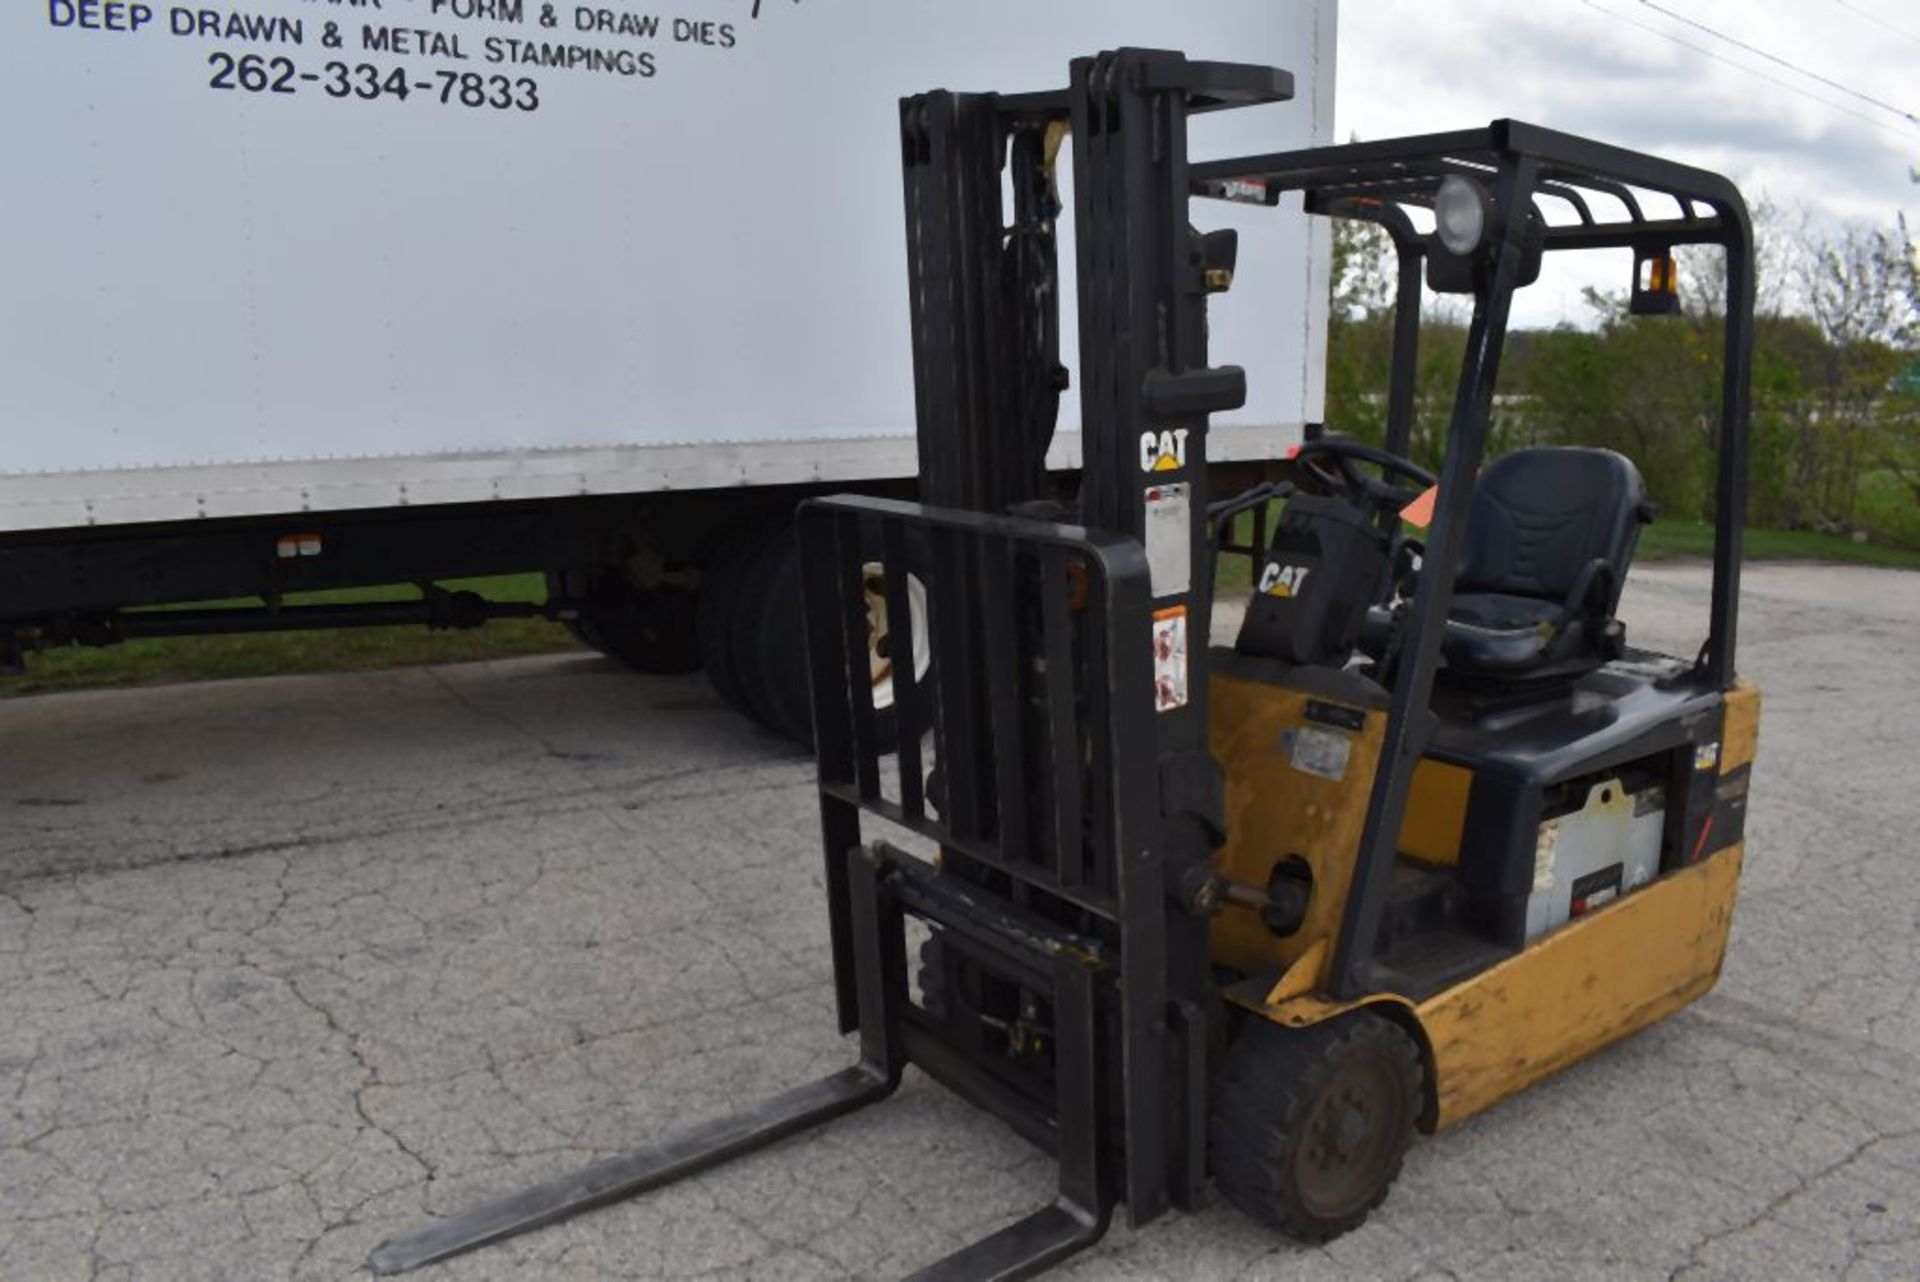 CATERPILLAR RIDE ON FORK TRUCK, MODEL ET3500-AC, S/N: ETB1400111, 36V ELECTRIC TYPE WITH CHARGER,